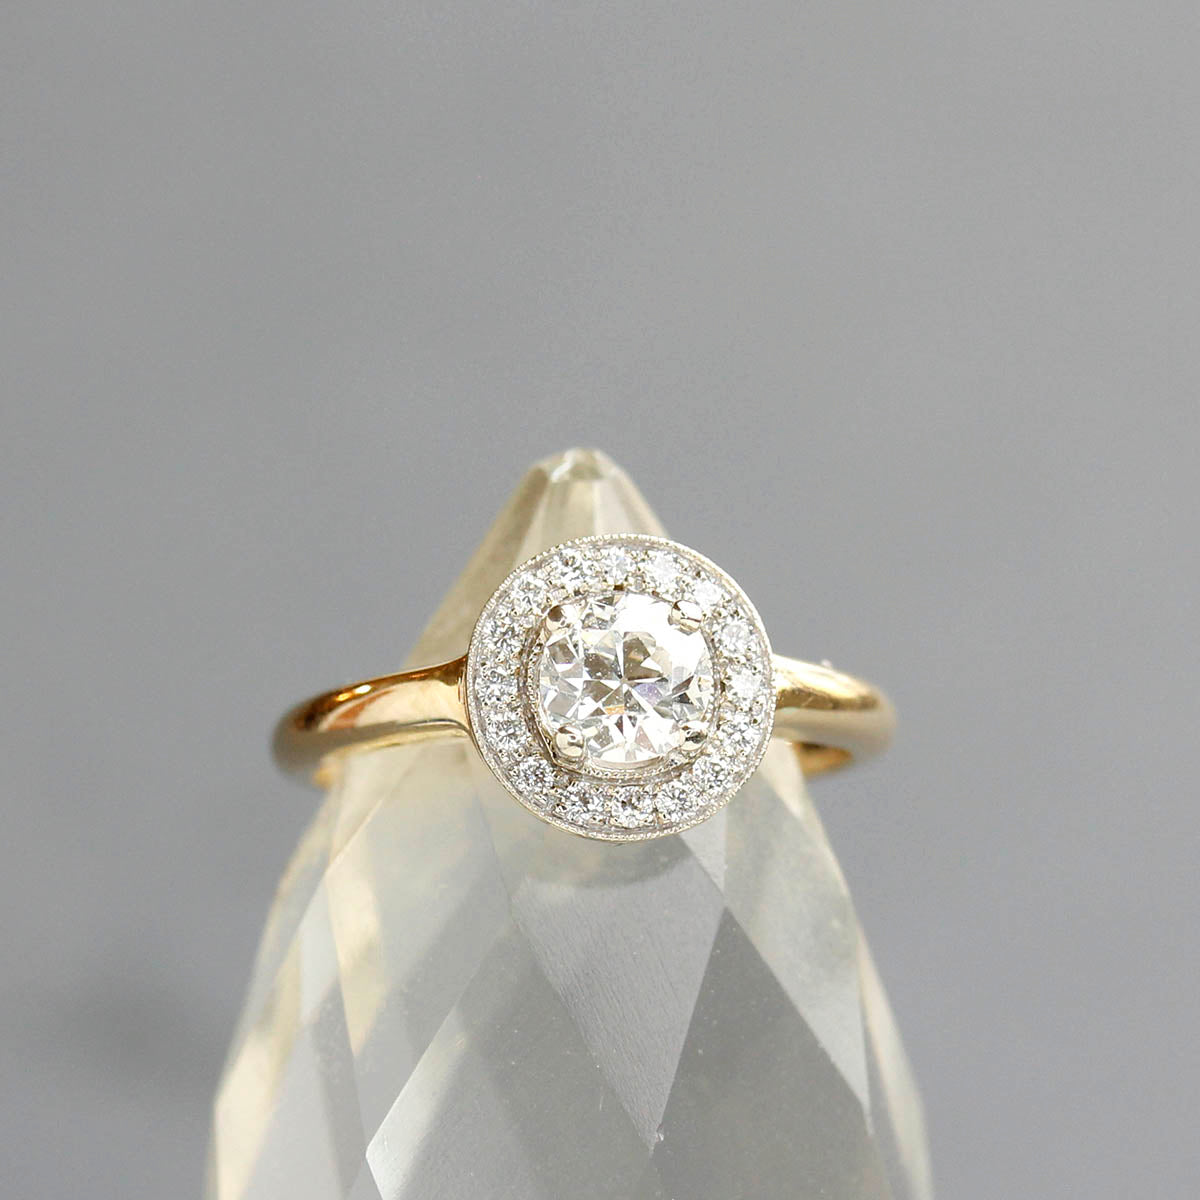 Replica Art Deco "halo" engagement ring set with a vintage diamond #3389-01 - Leigh Jay & Co